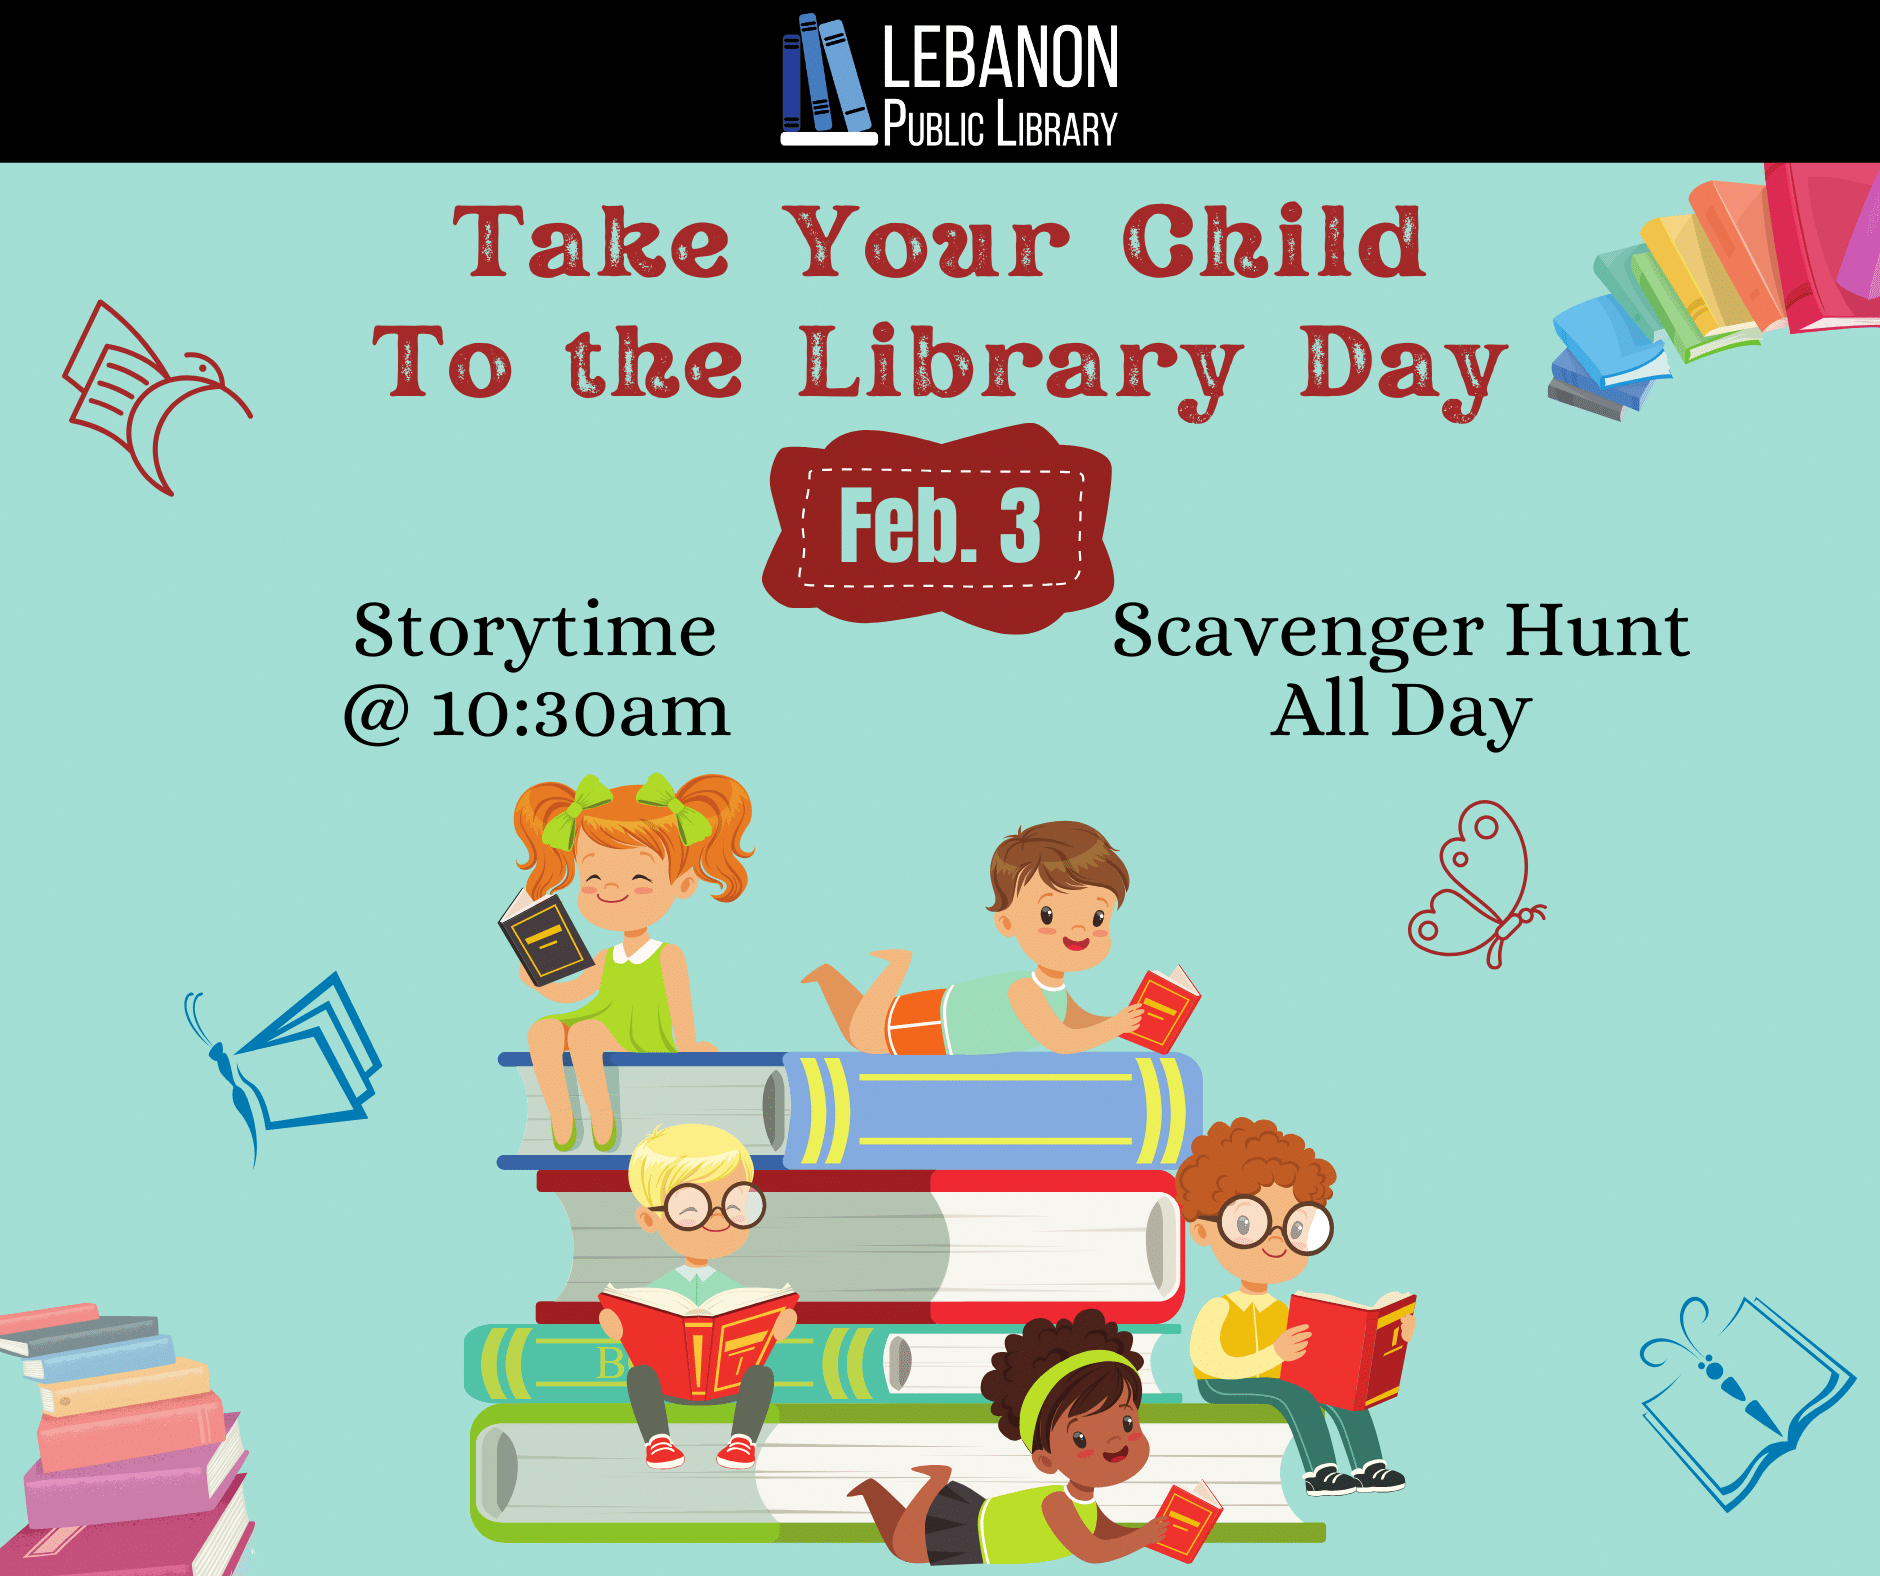 Take Your Child to the Library Day, February 3rd, Storytime at 10:30am, Scavenger Hunt all day